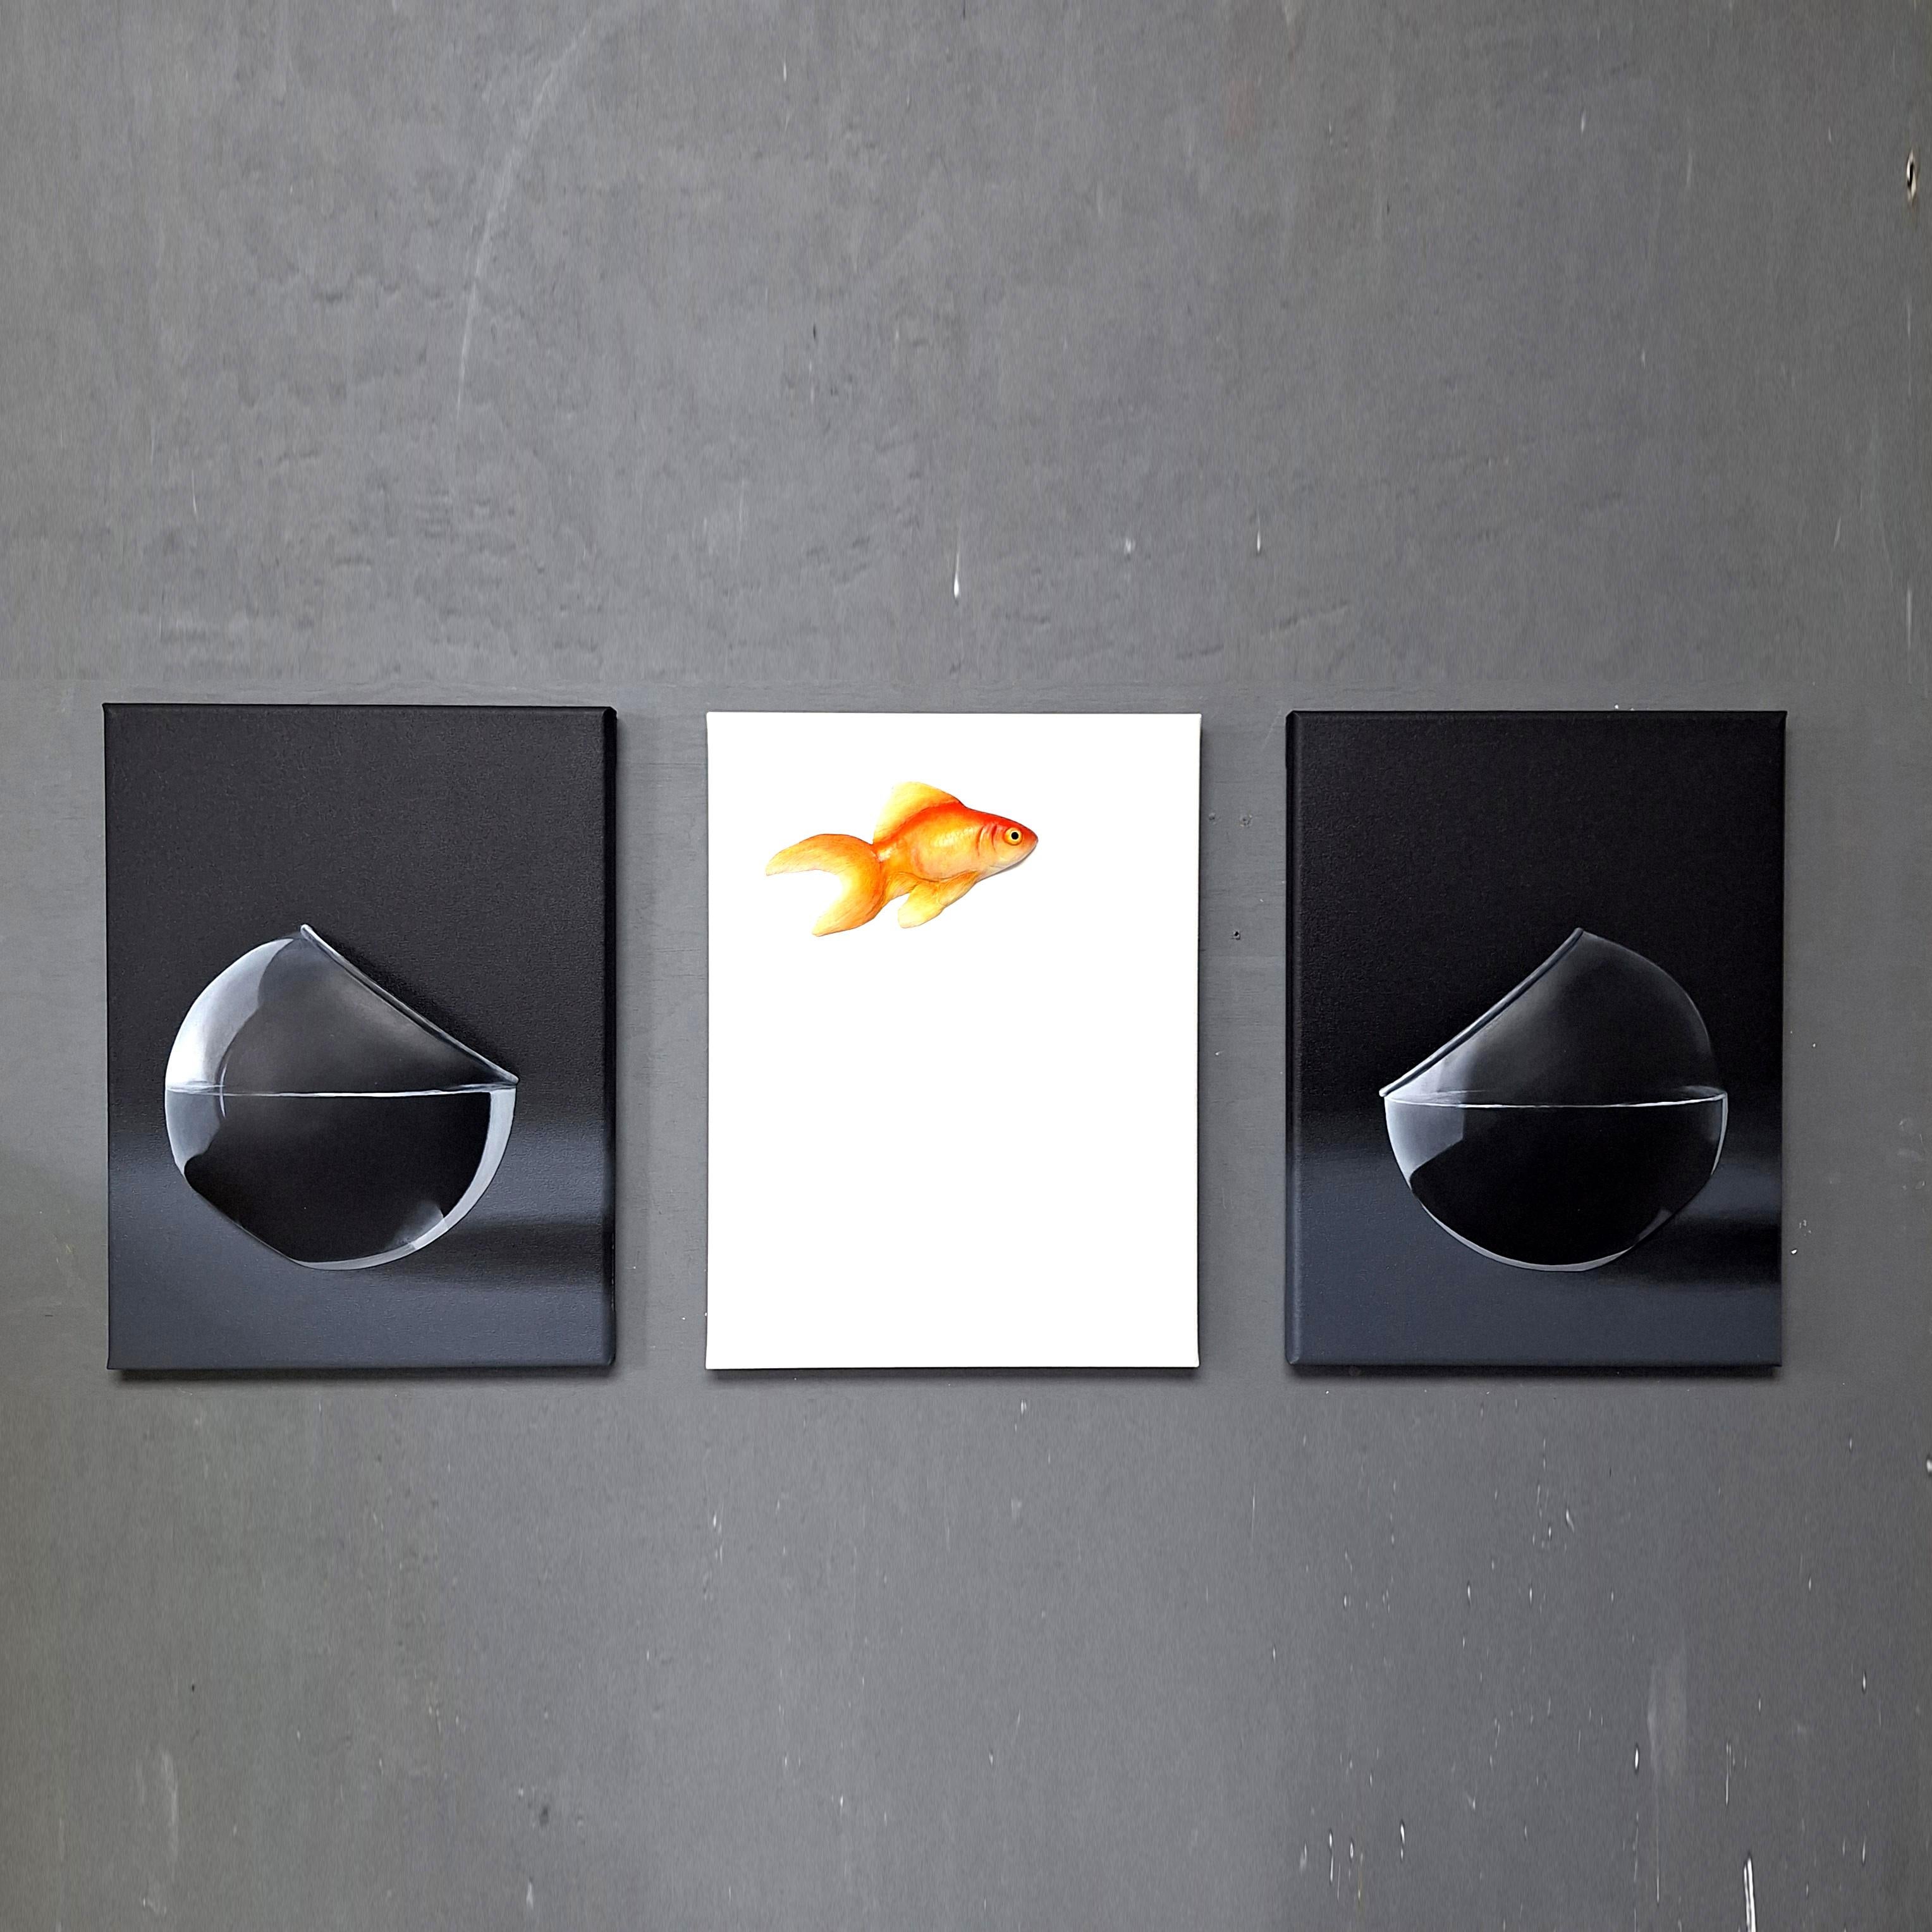 In "Leap of faith. Goldfish."Limited Edition of 8 by Henk Jan Sanderman, the artist ingeniously captures the essence of breaking free from the constraints of familiarity. Through a series of three canvases, Sanderman presents a whimsical journey of